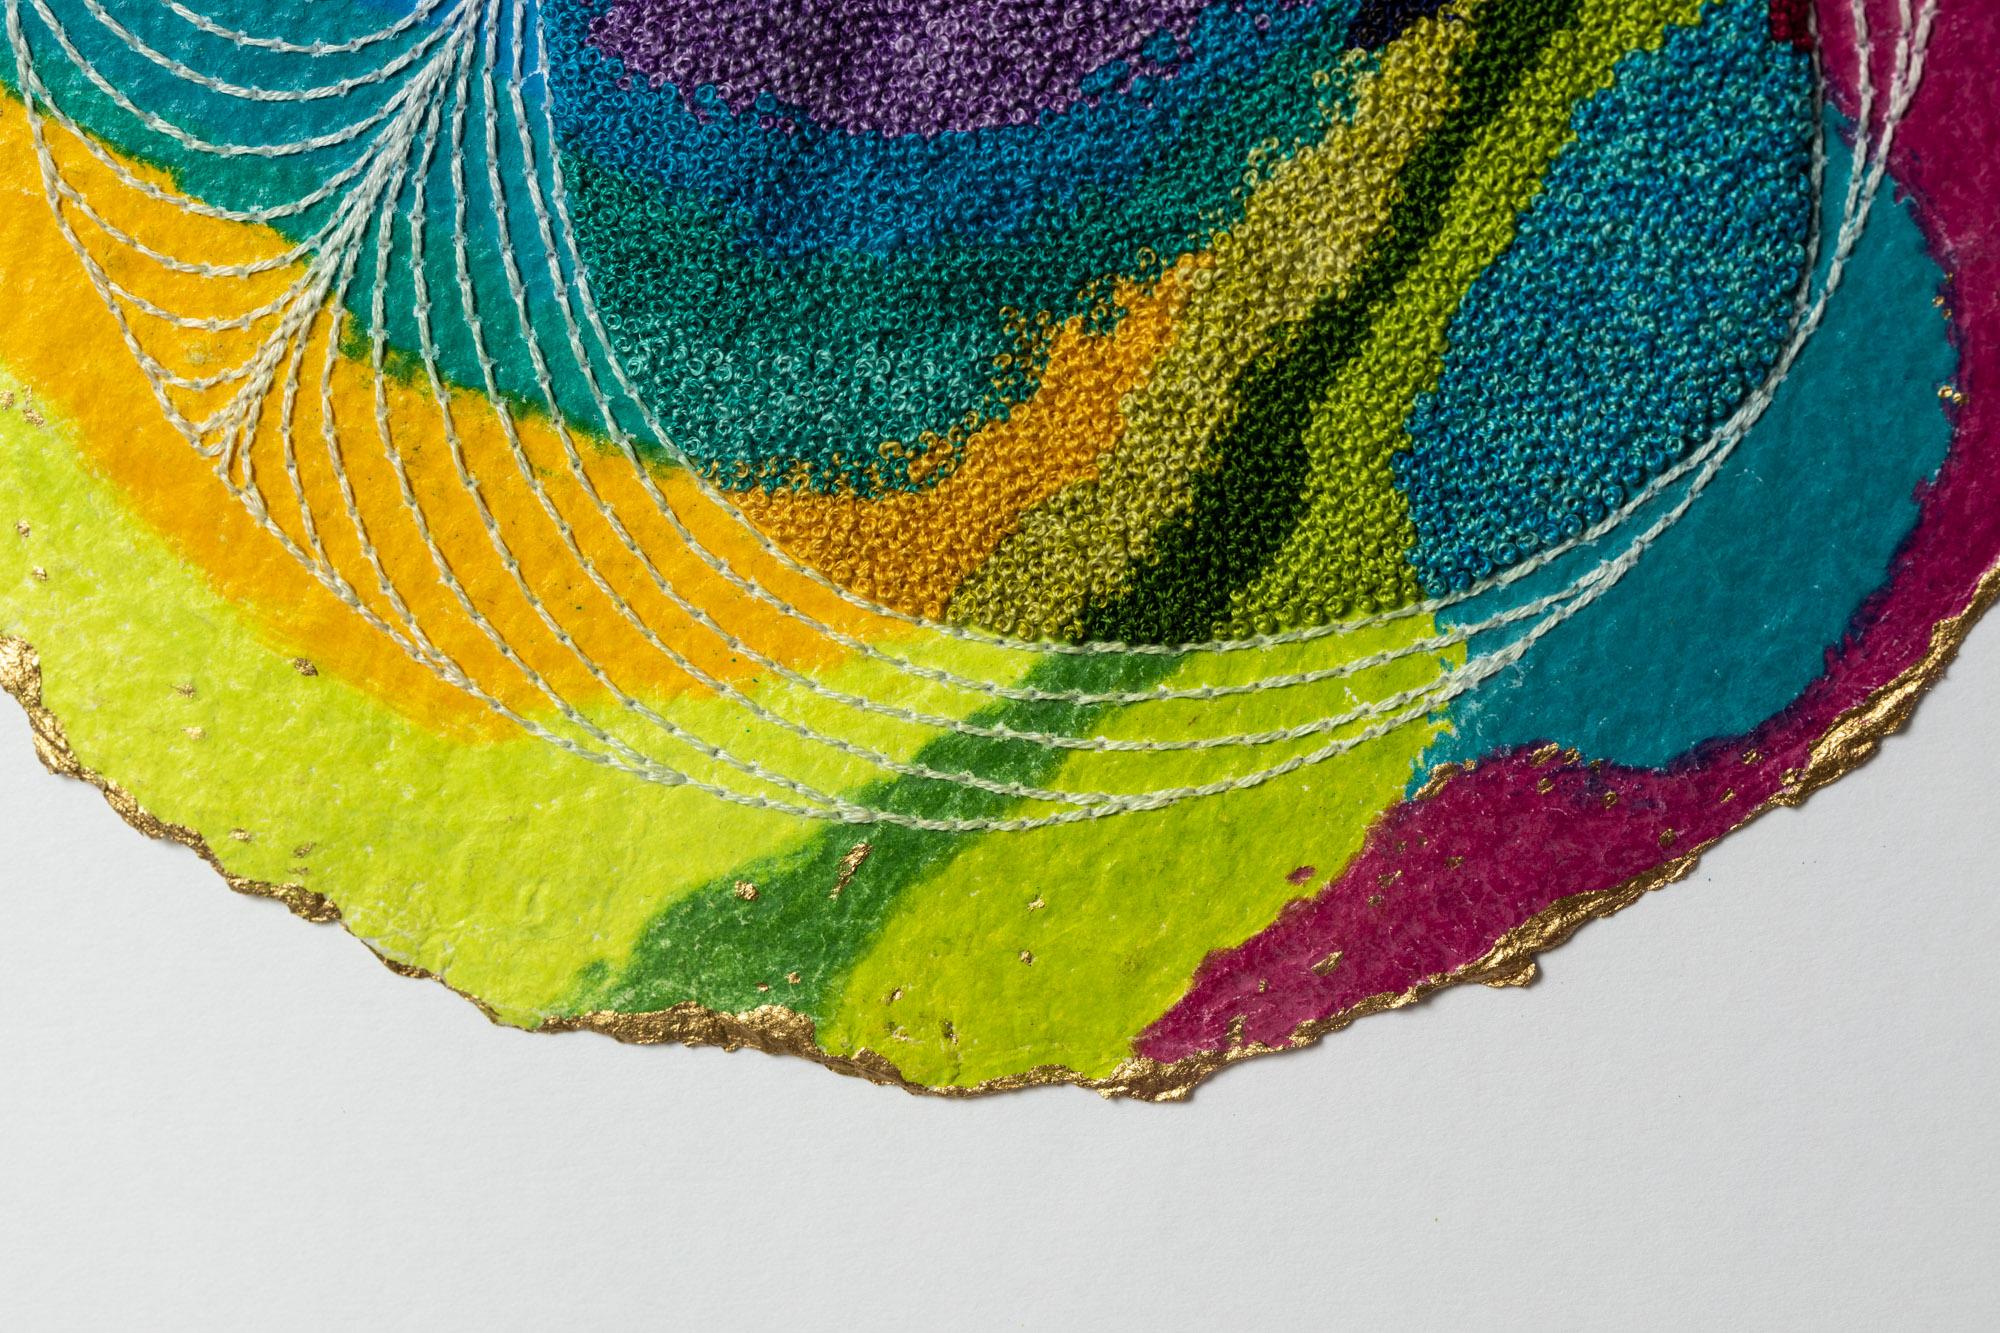 This fibers, drawing, and sculptural work titled 